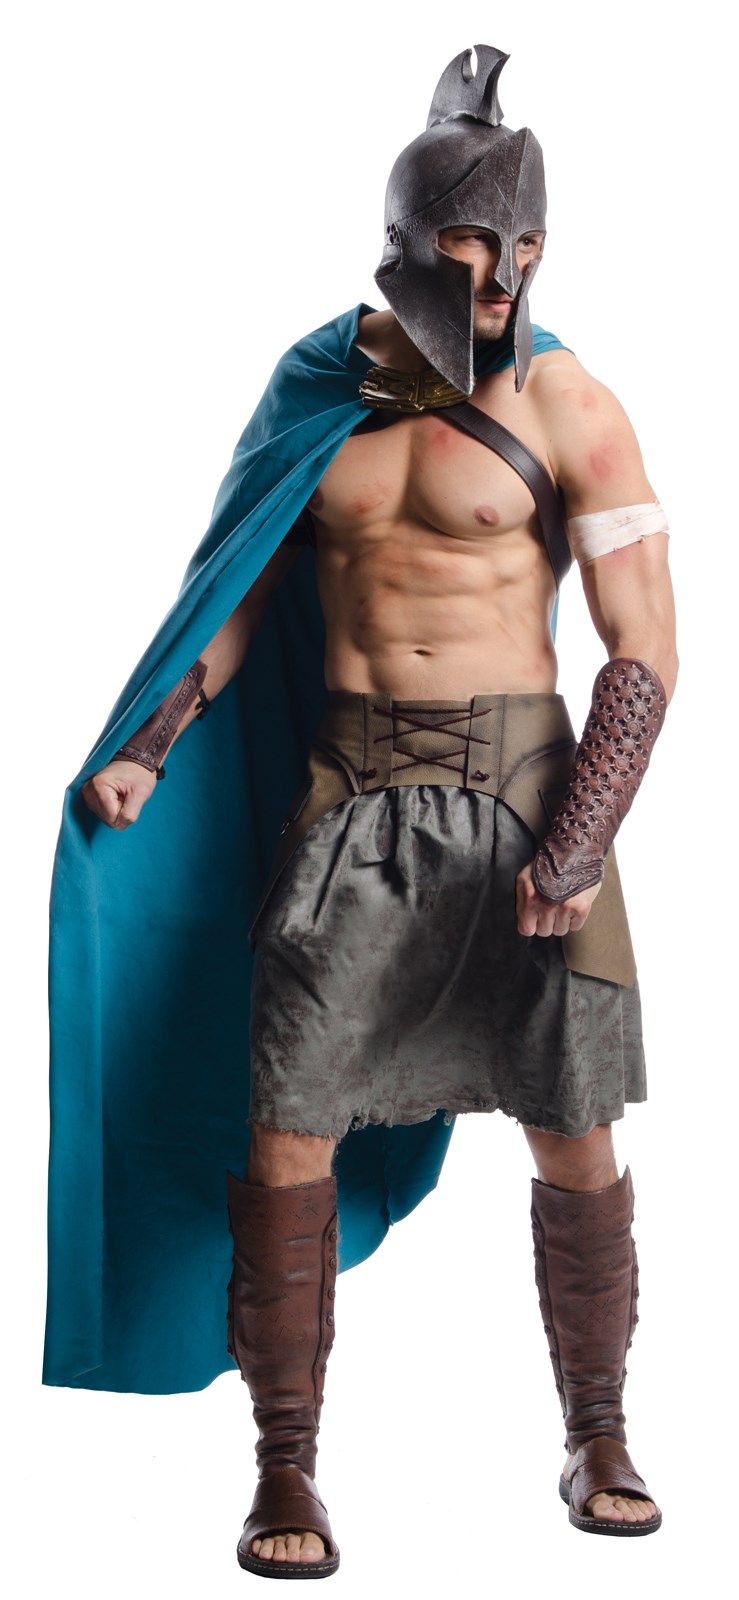 300: Rise Of An Empire - Deluxe Themistocles Costume